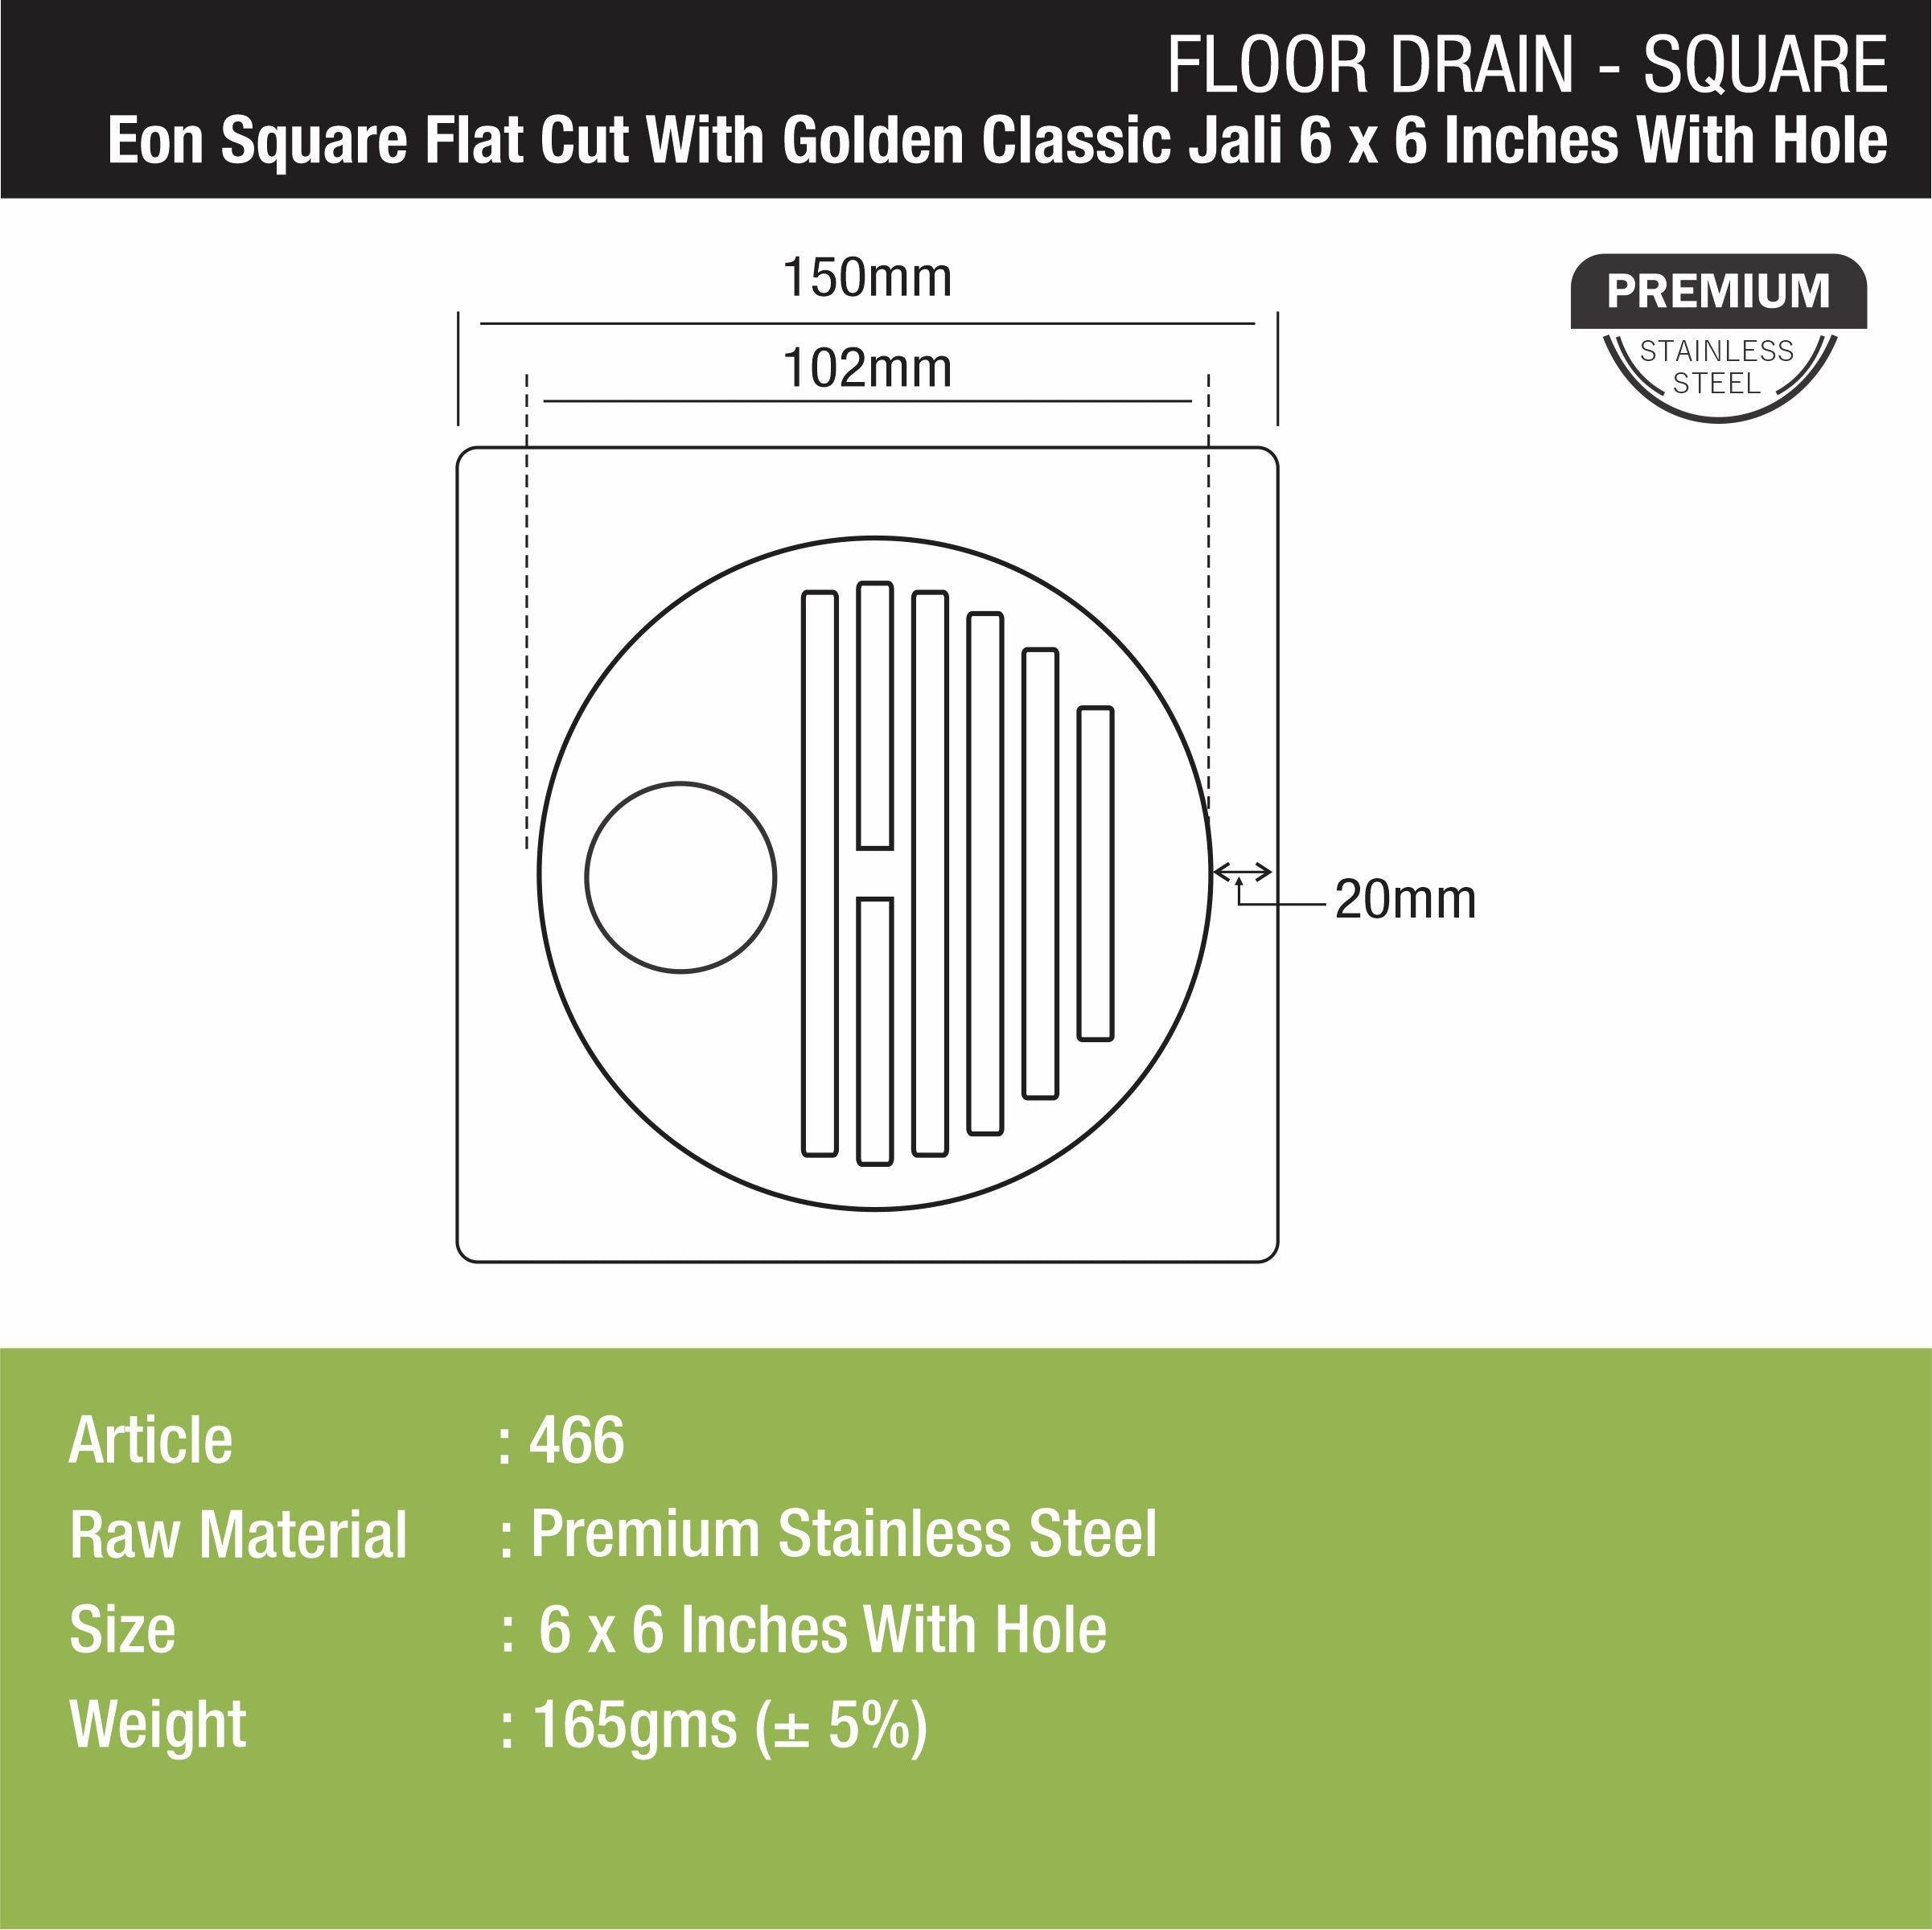 Eon Square Flat Cut Floor Drain with Golden Classic Jali and Hole (6 x 6 Inches) - LIPKA - Lipka Home